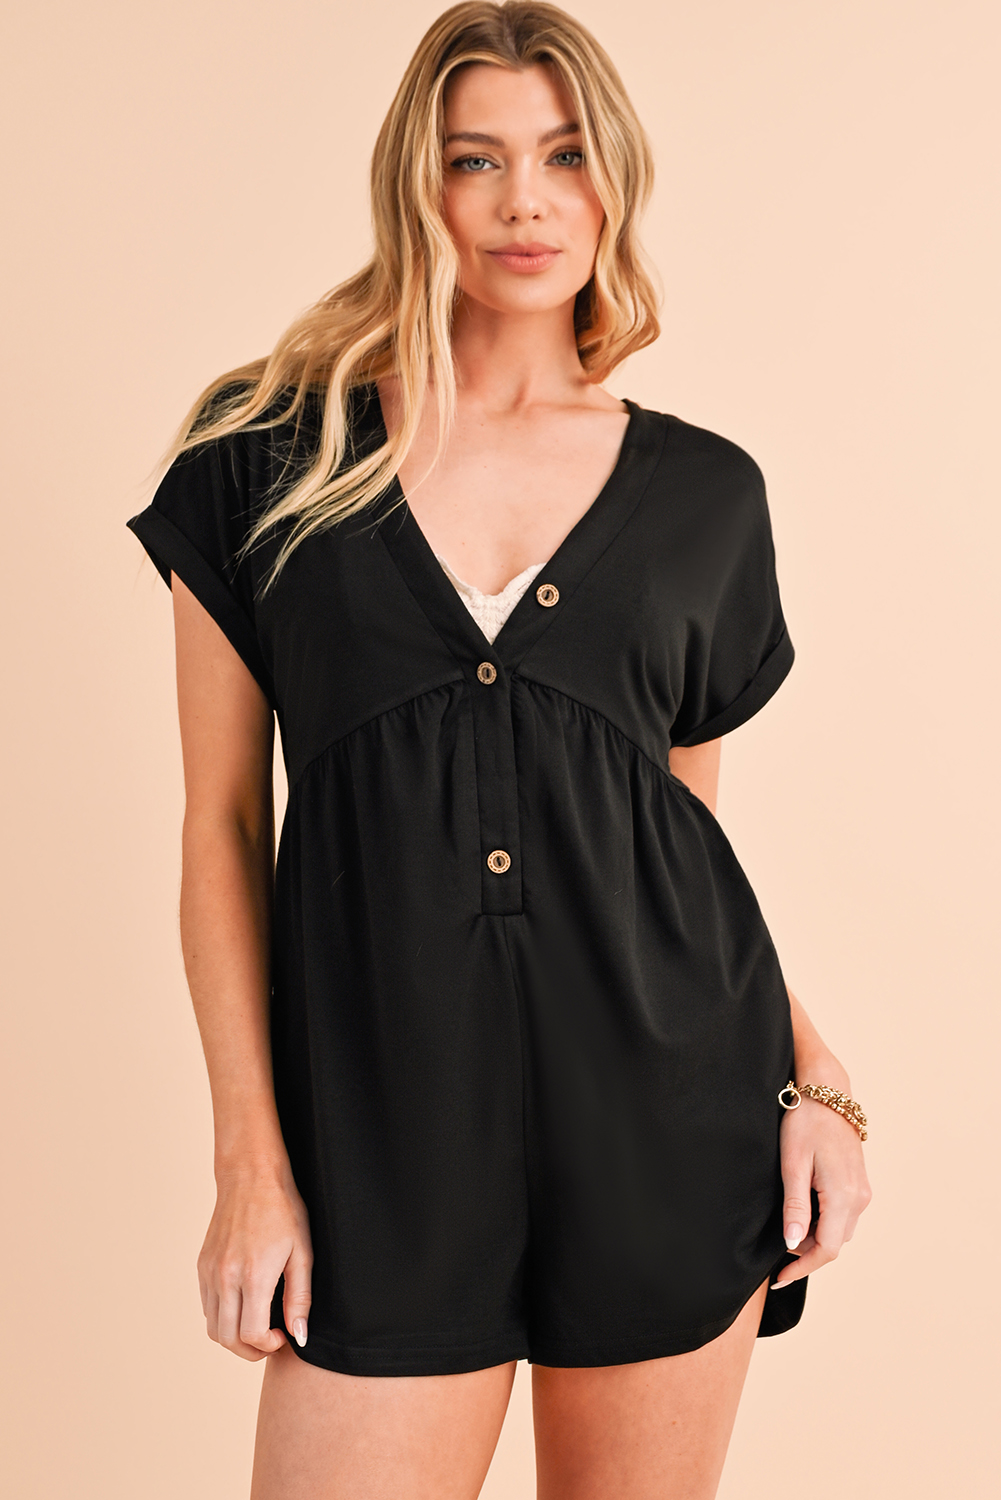 Shewin Wholesale Suppliers Black V Neck Buttons Loose Cuffed SHORT Sleeve Romper